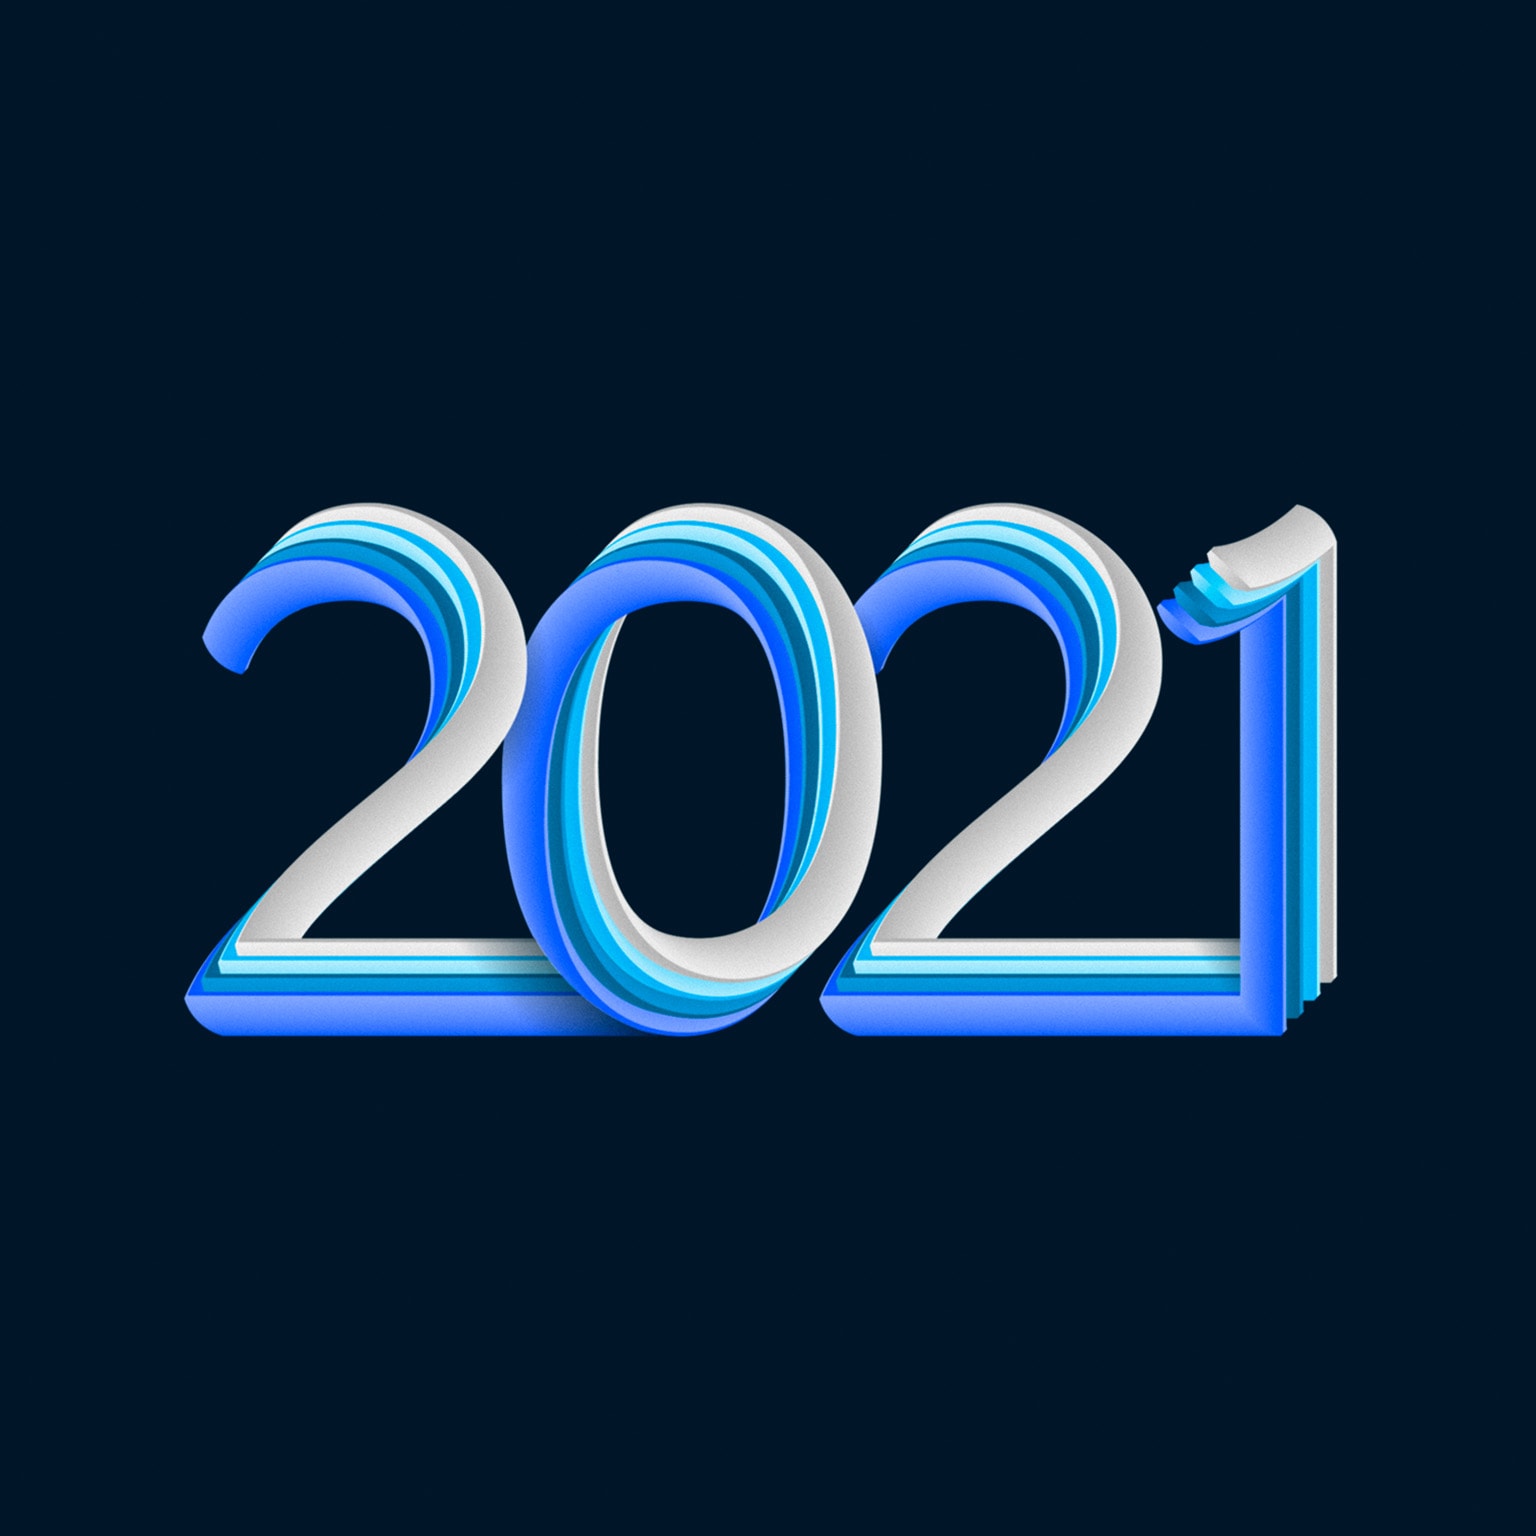 McKinsey 2021 business articles: The year in review | McKinsey